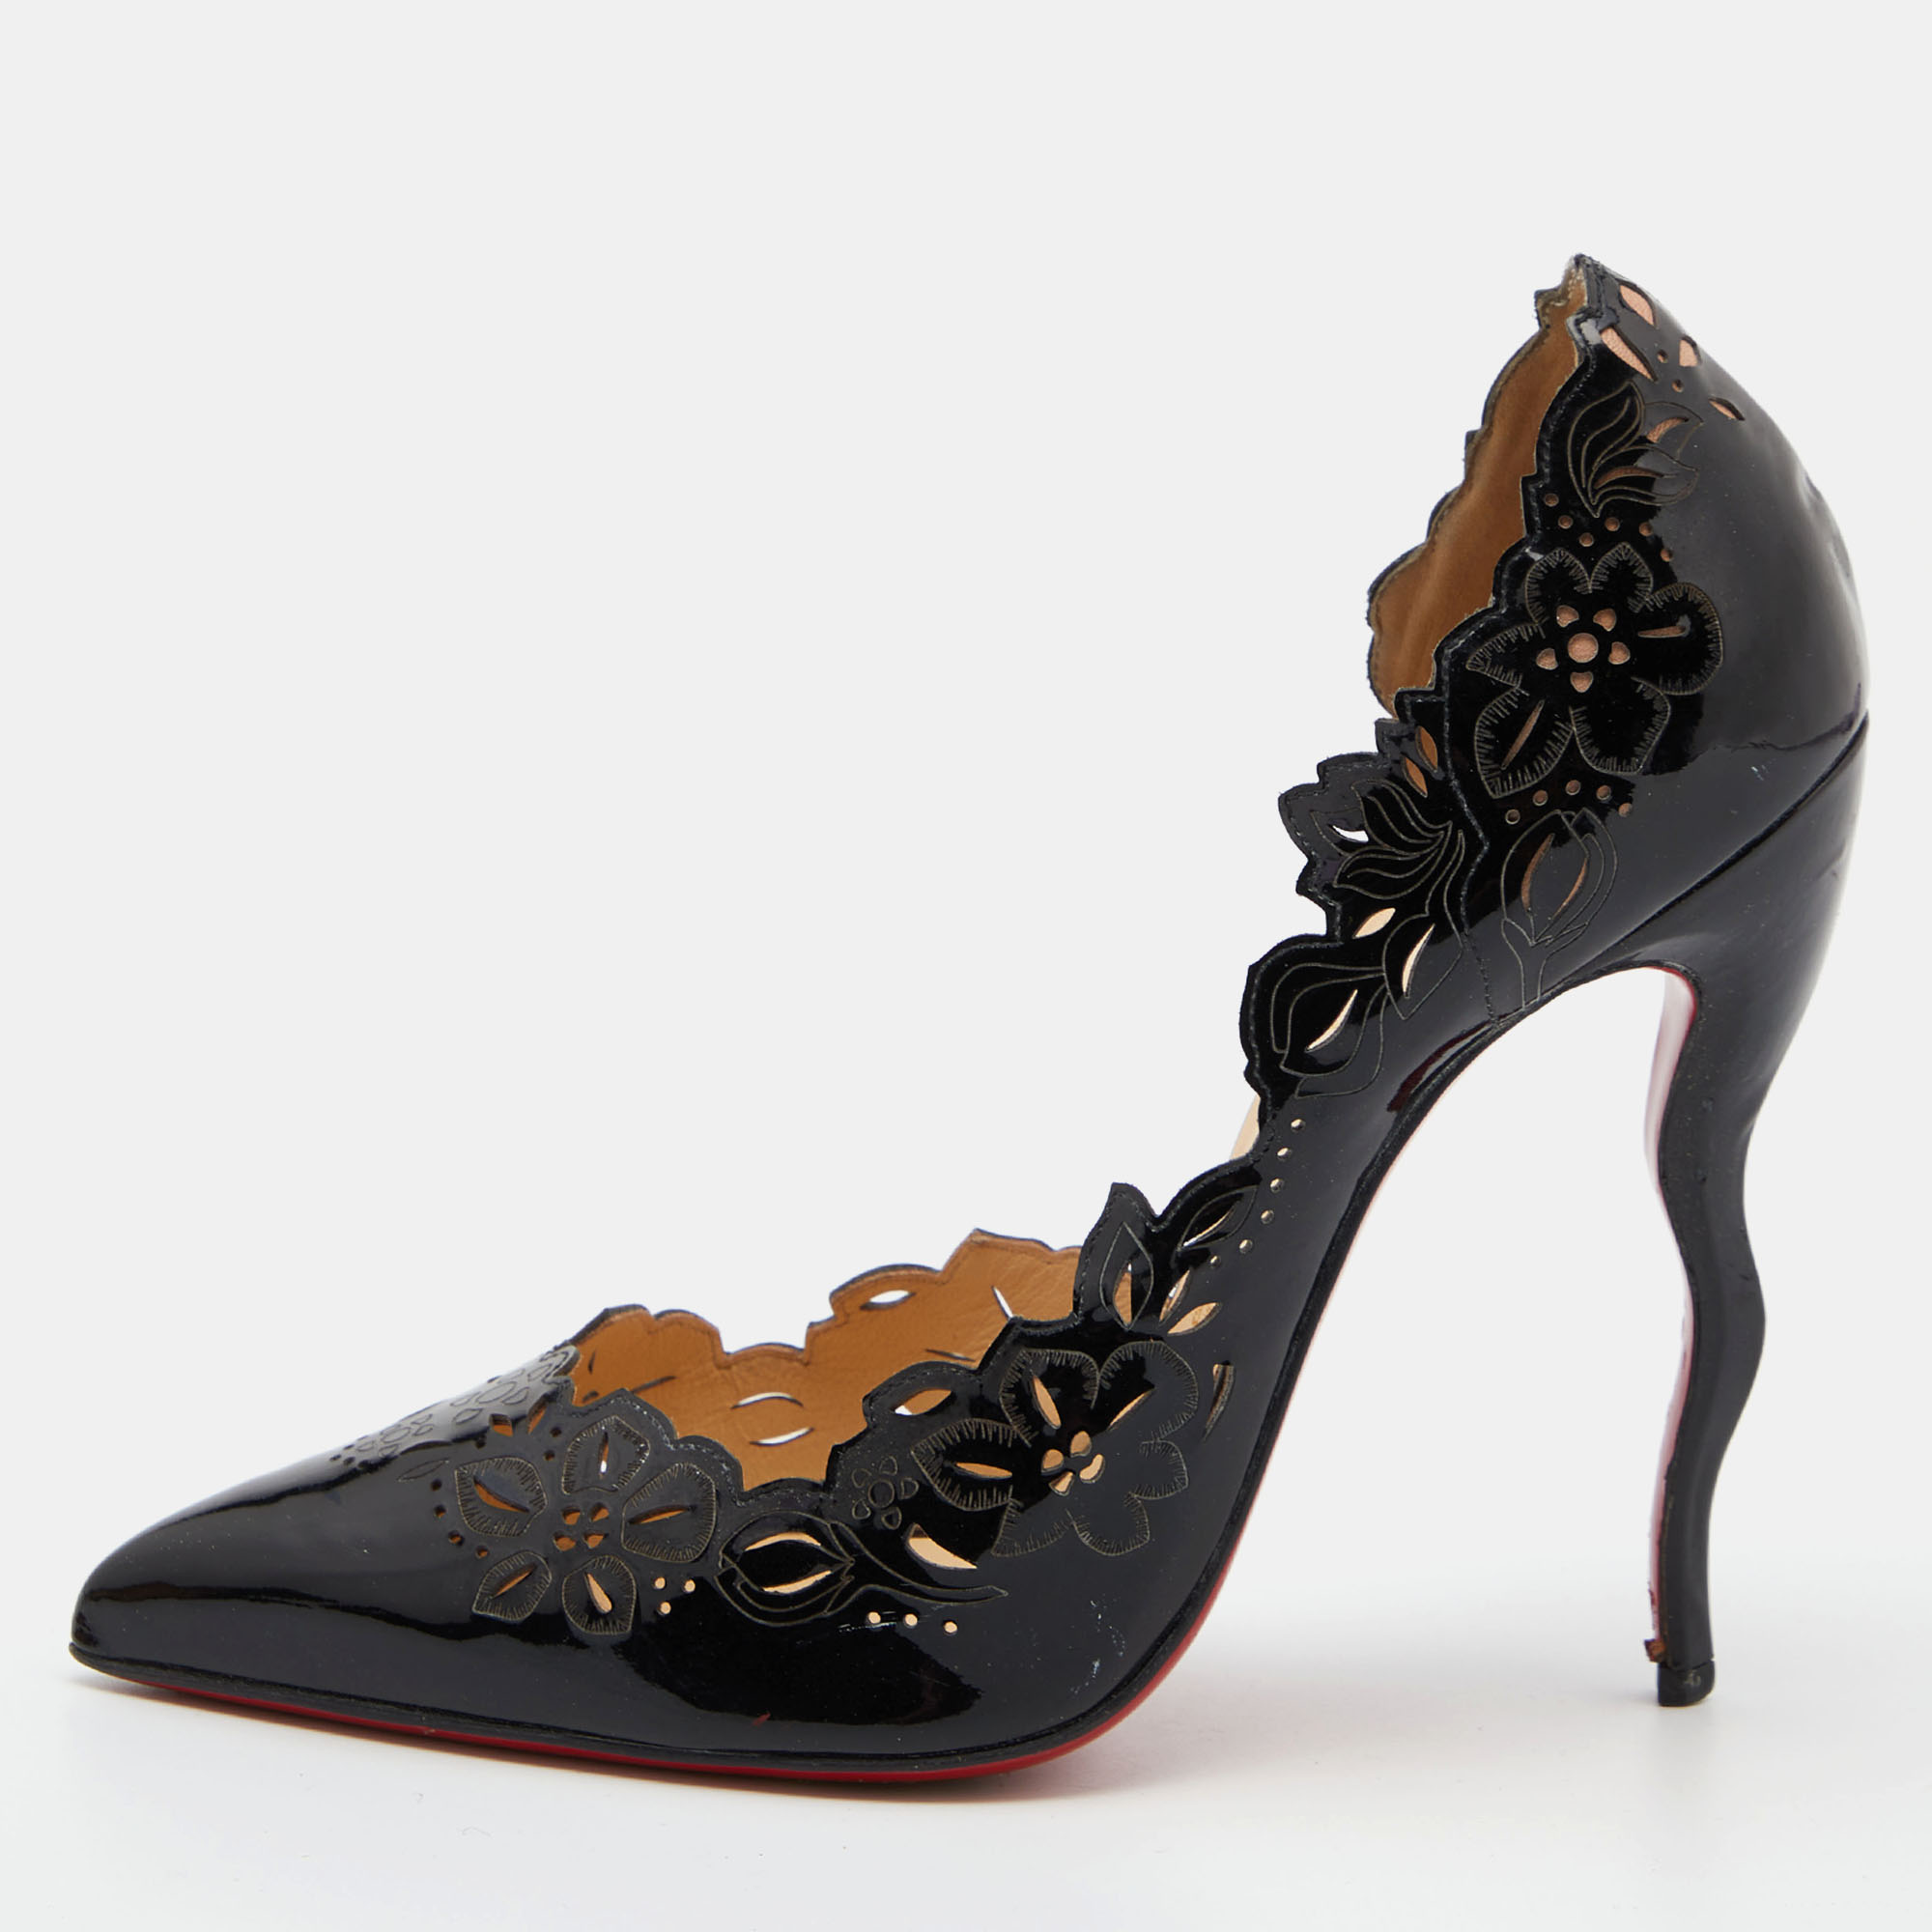 Christian Louboutin pre-owned black heeled pumps